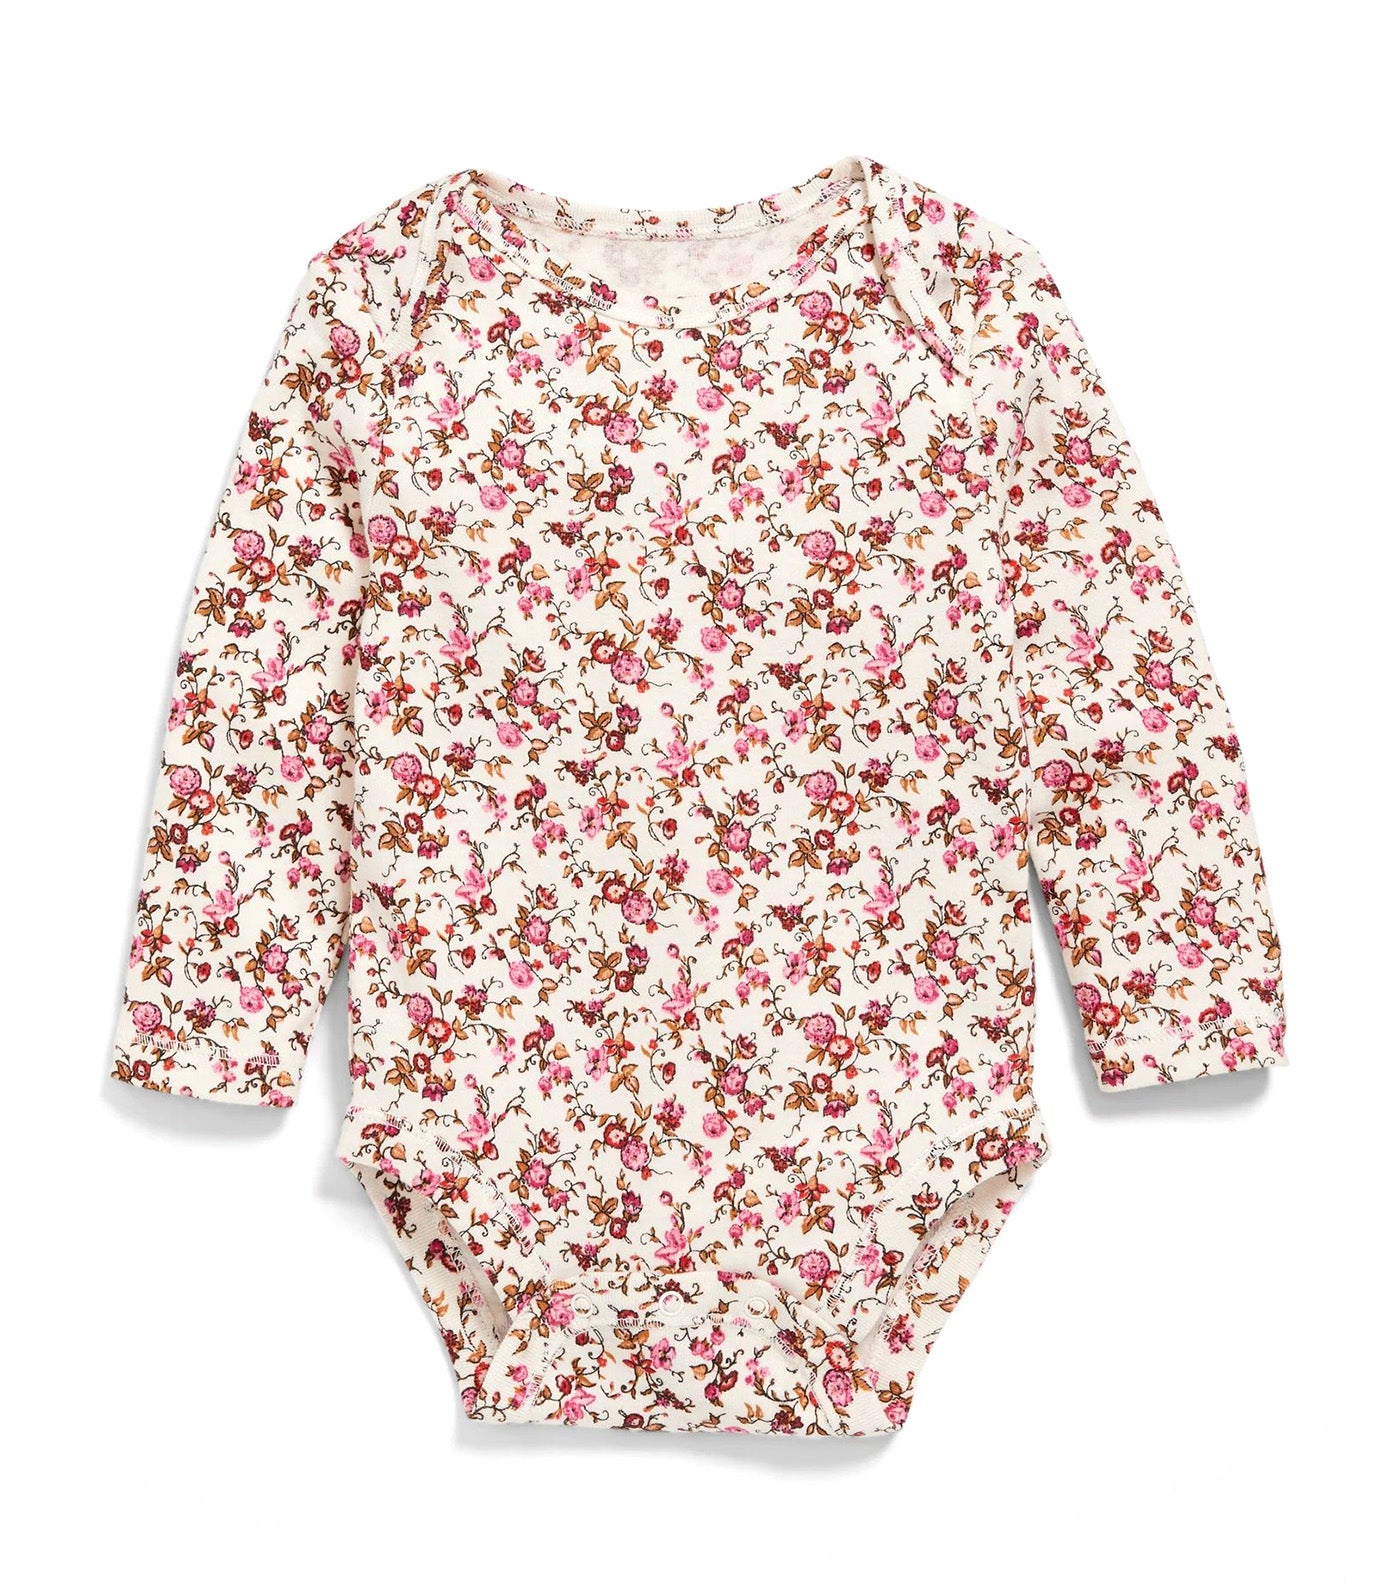 Unisex Long-Sleeve Printed Bodysuit for Baby Floral Painted